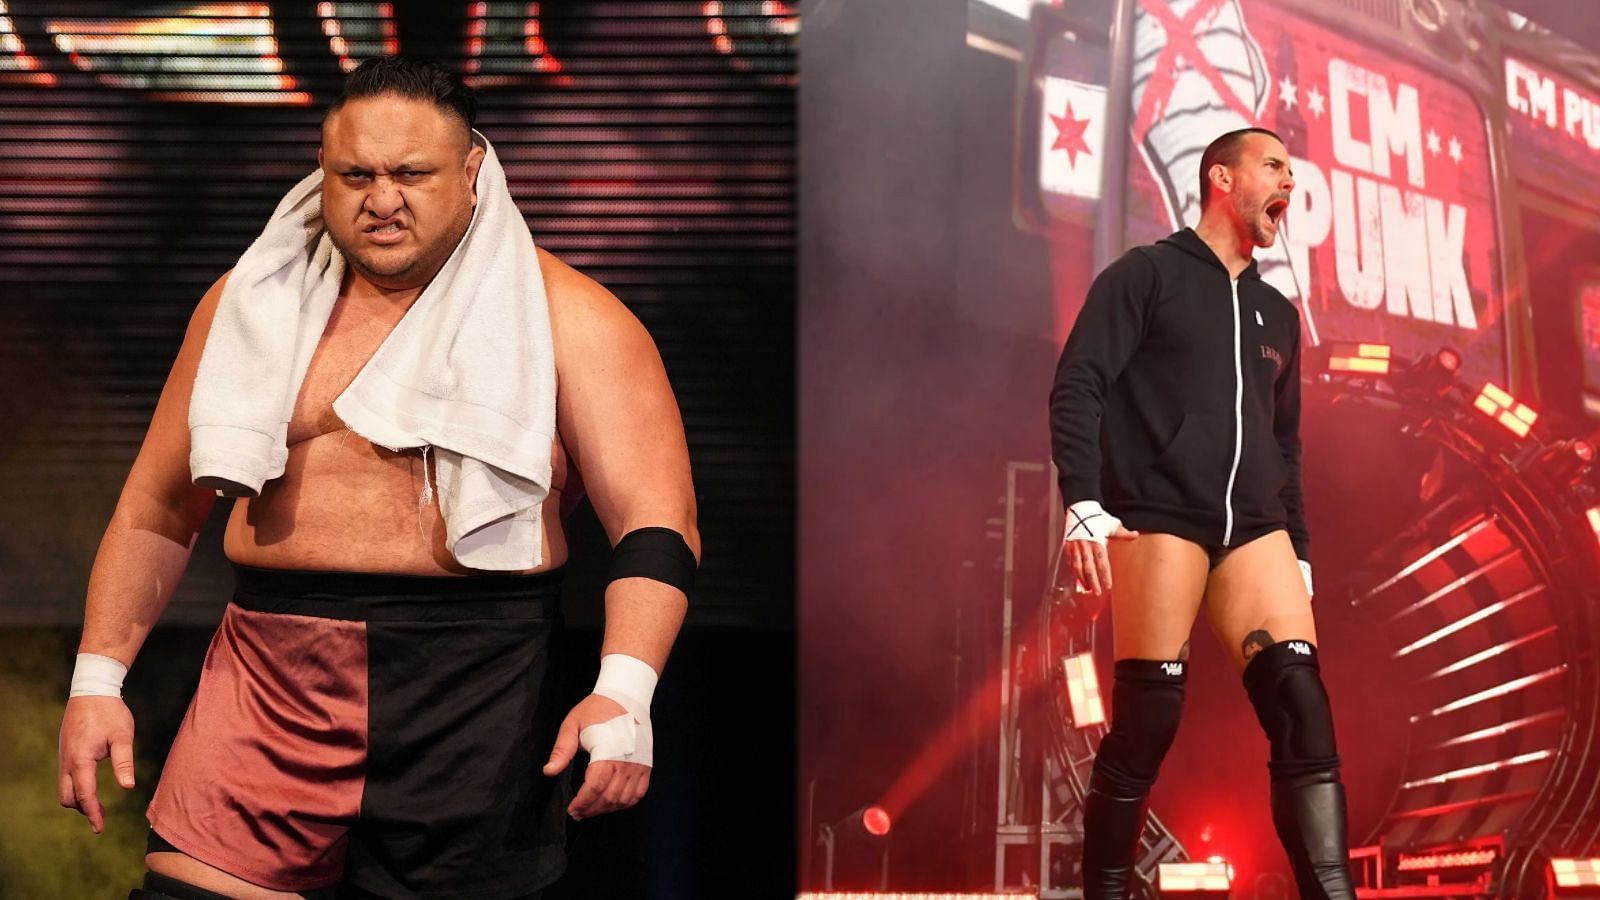 The two former ROH stars are set to make appearances on AEW Dynamite.